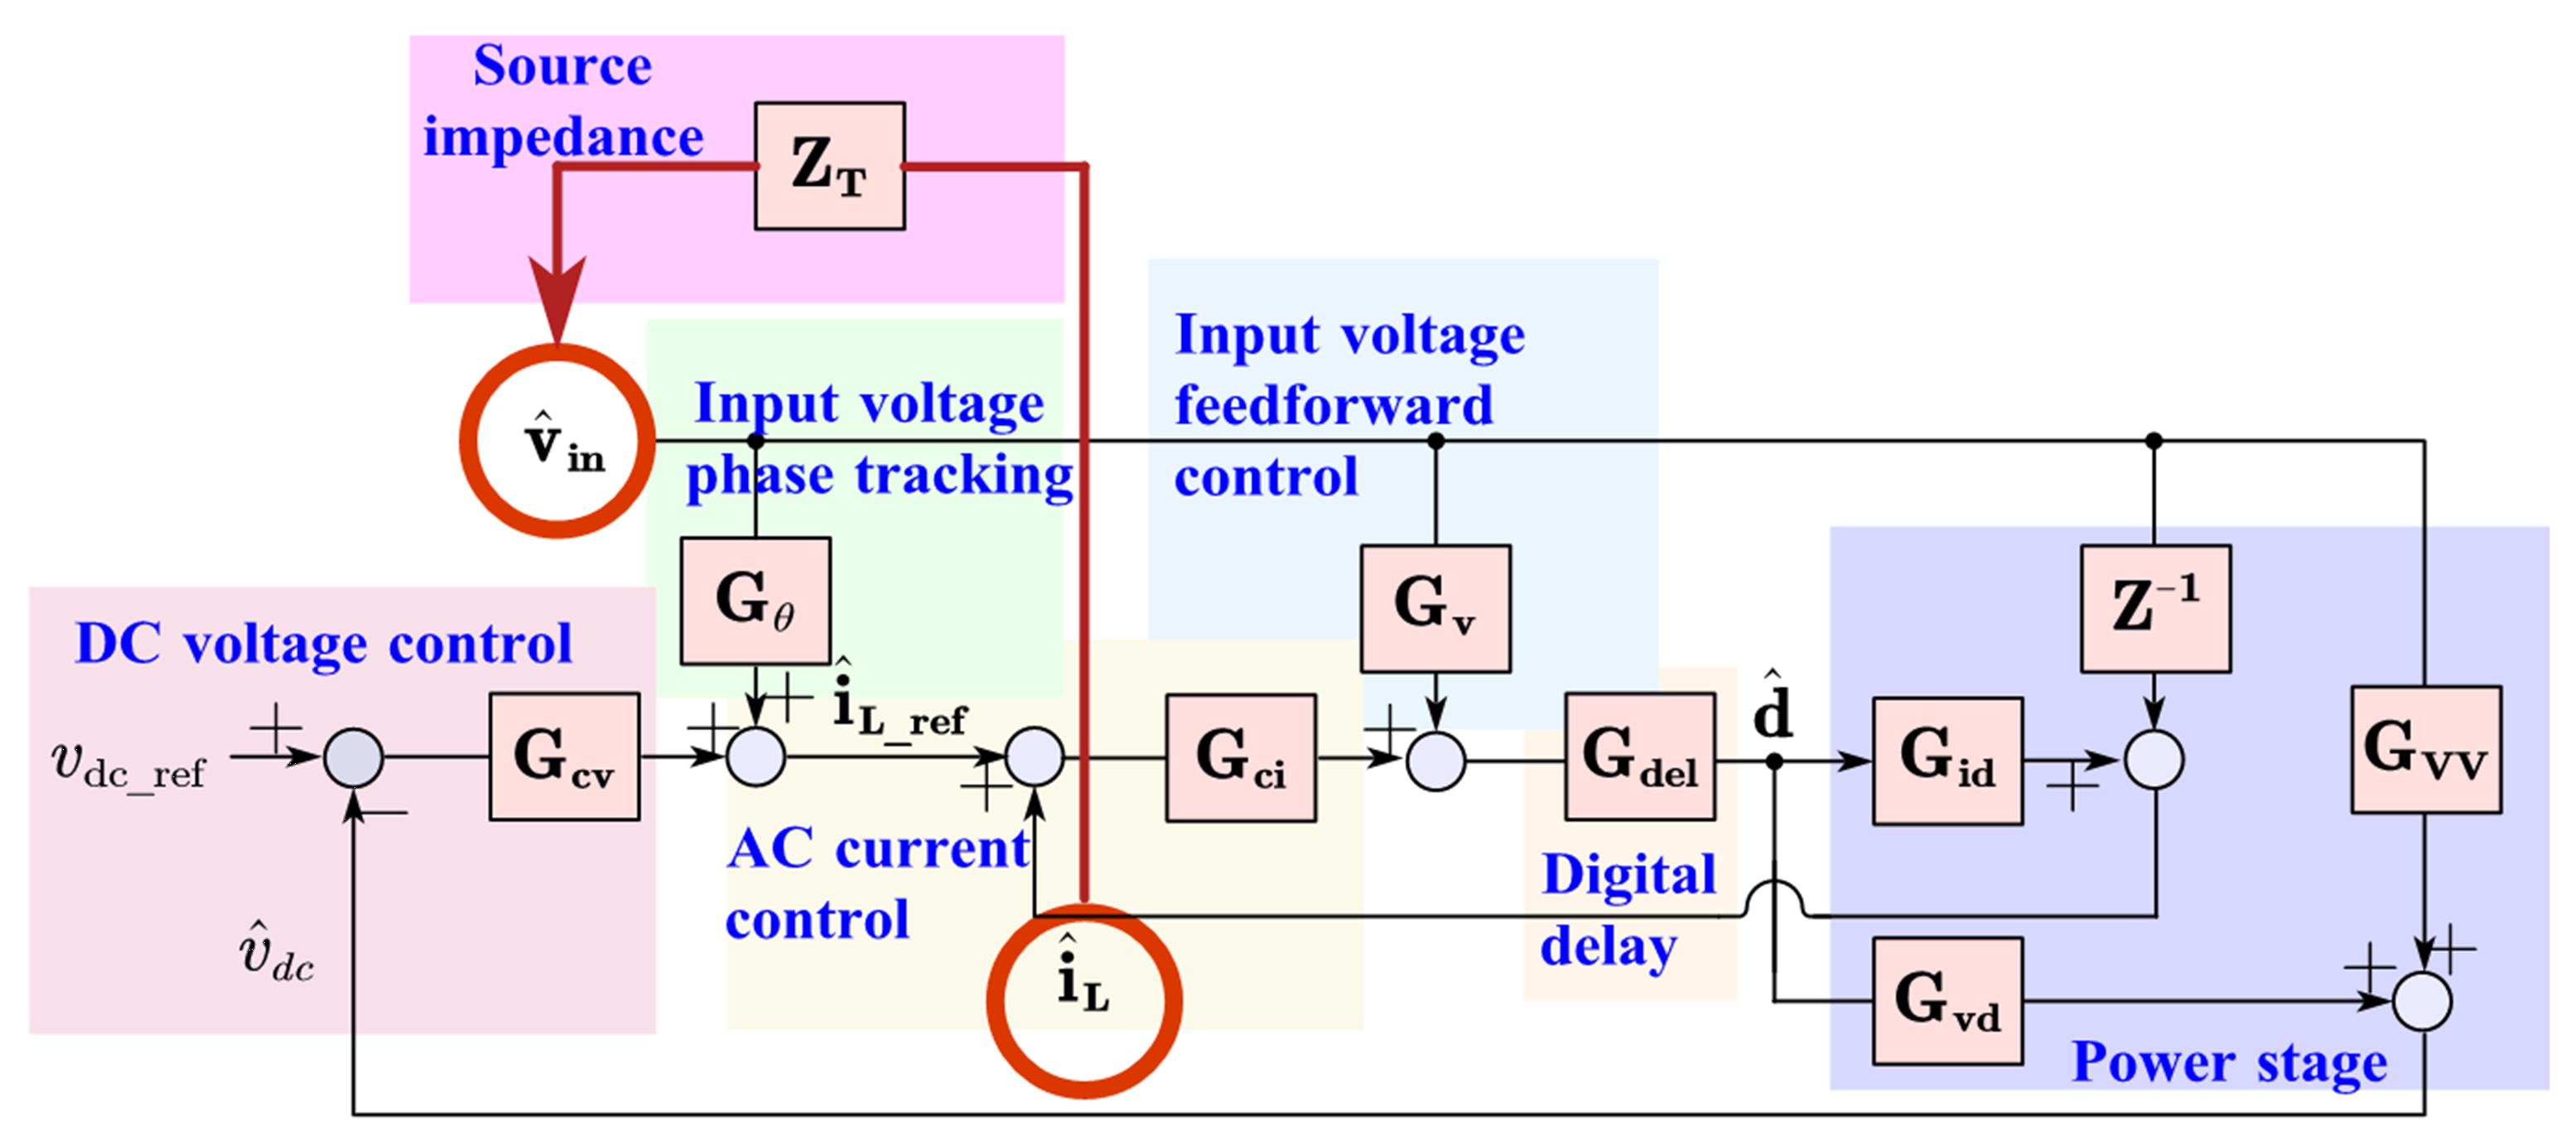 Control loop for single phase PFC